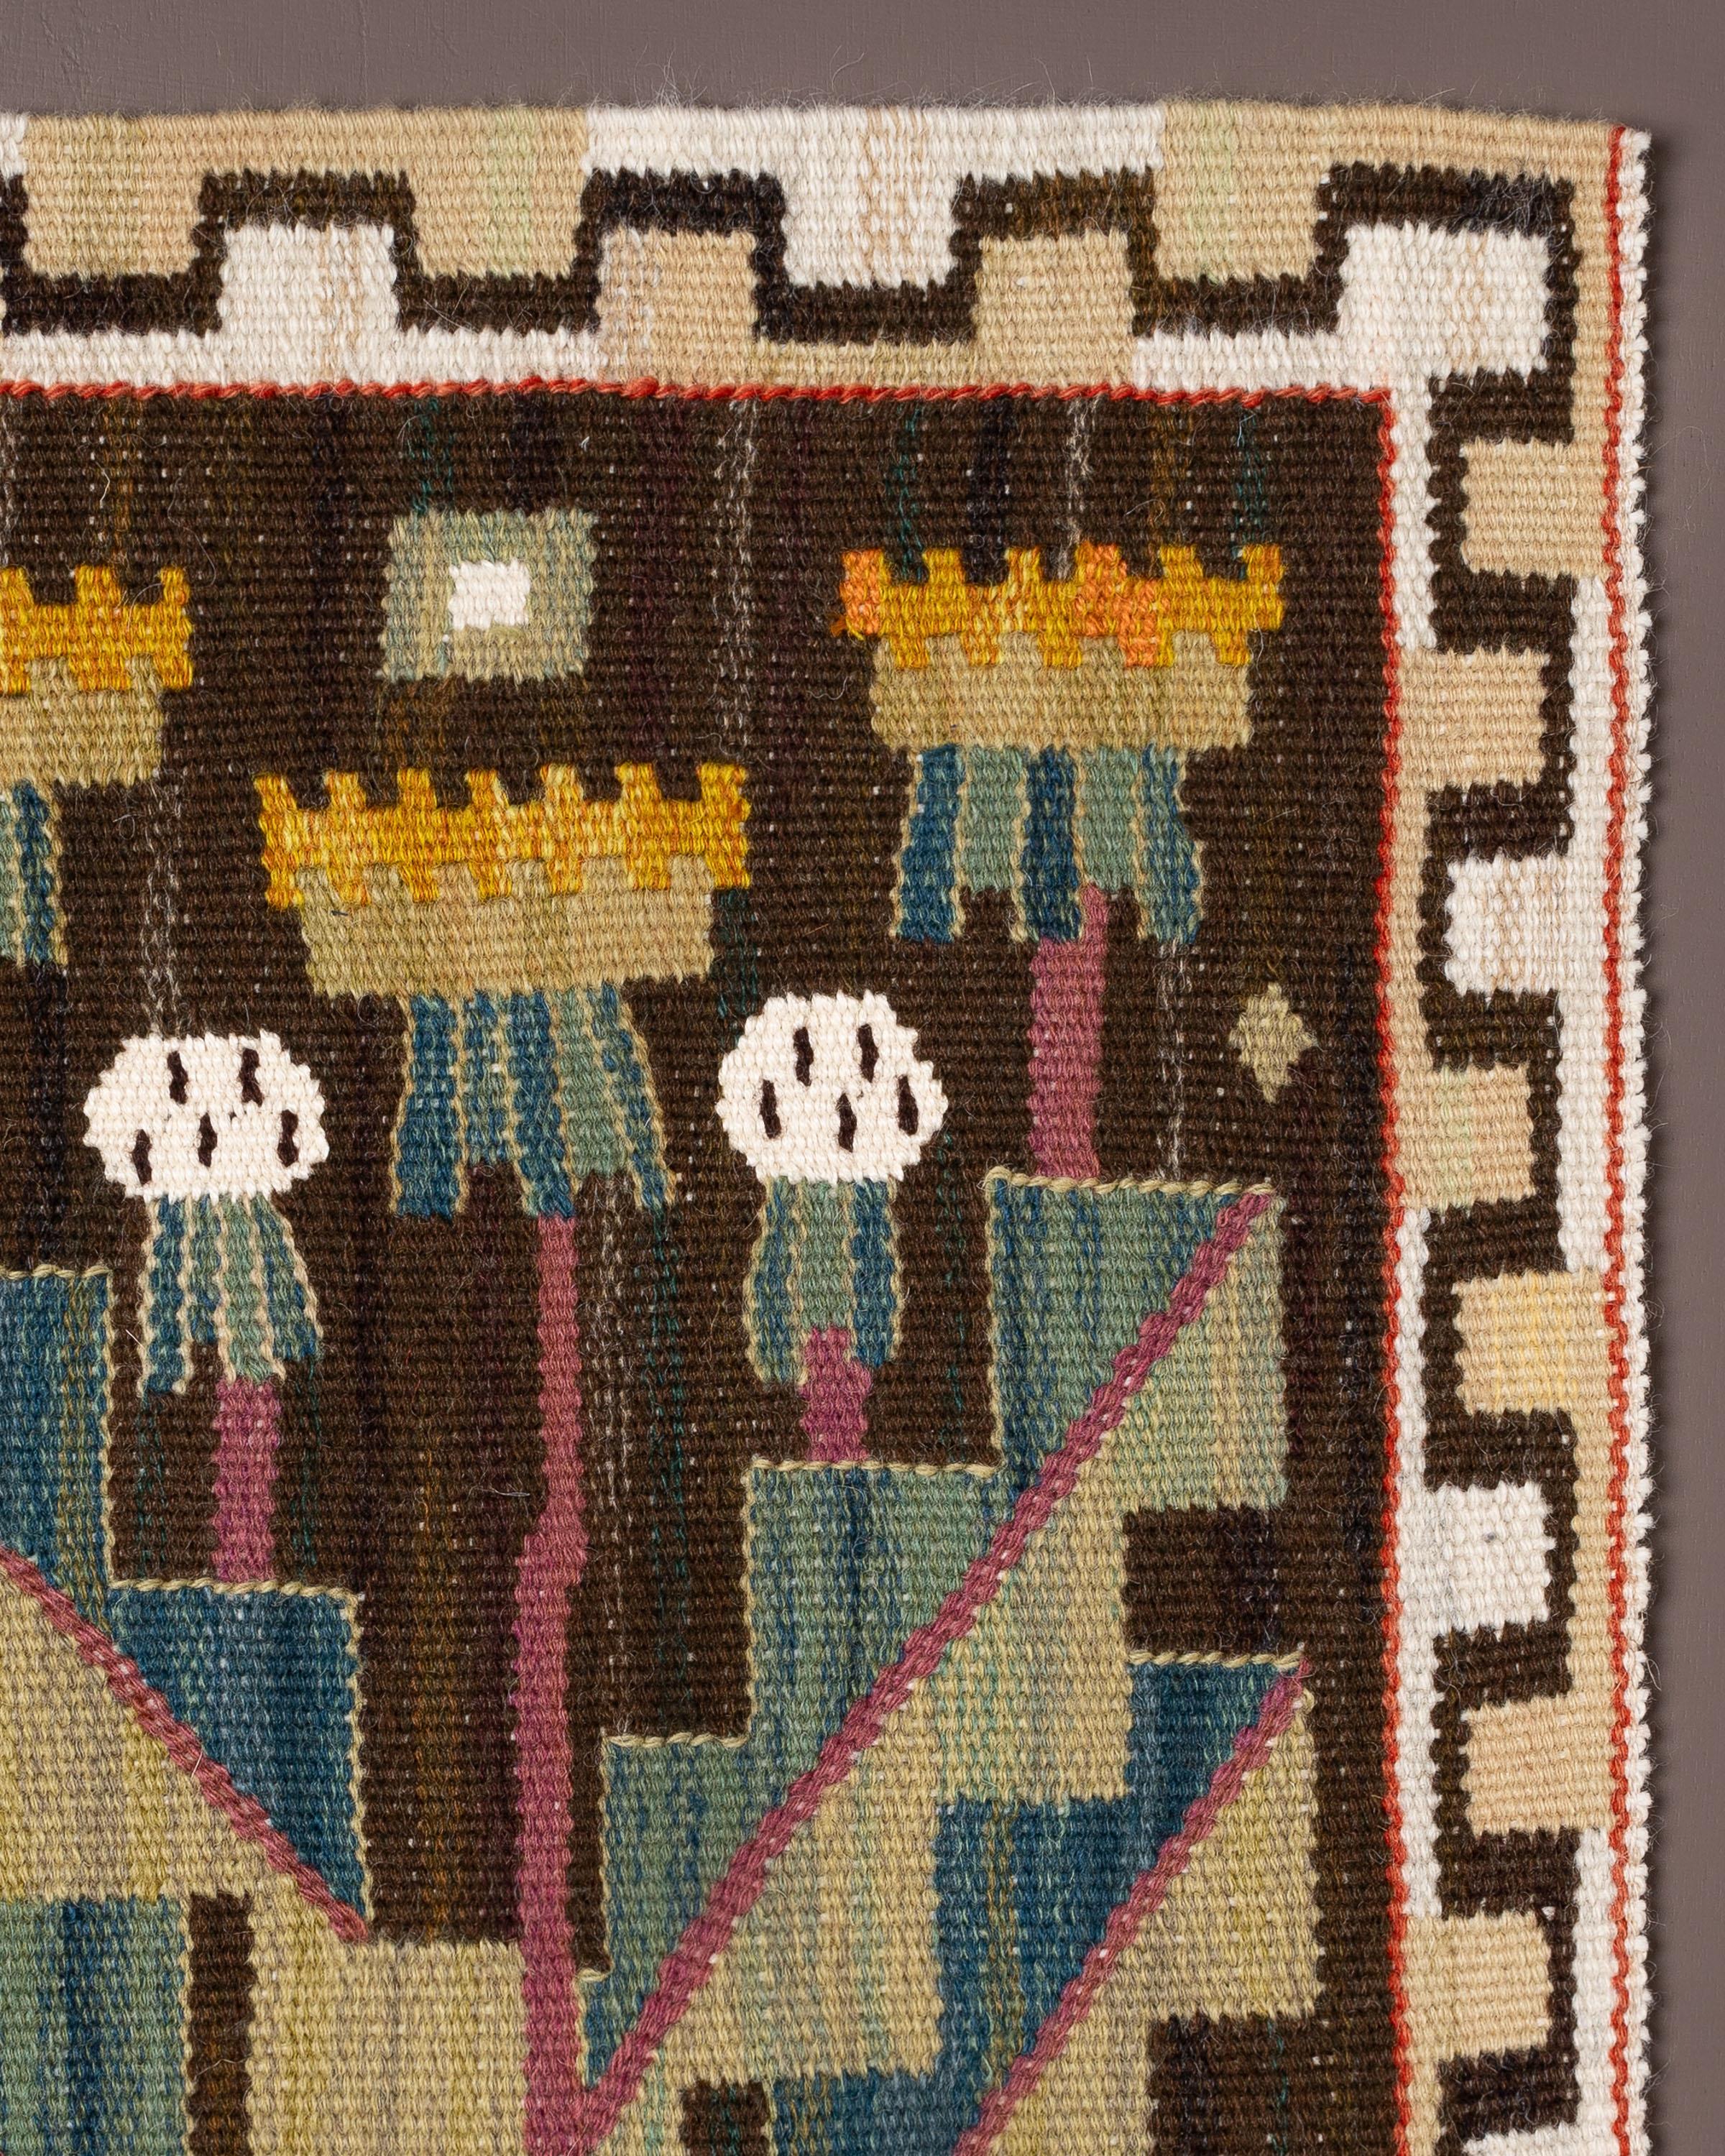 Handwoven tapestry with a dandelion flowers designed by Märta Måås-Fjetterström in 1928.

One of all the flowers in the larger wall tapestry Juniblommor by Märta Måås-Fjettesrtröm 1928.

Woven in wool on a wool warp by artisan weaver Margareta